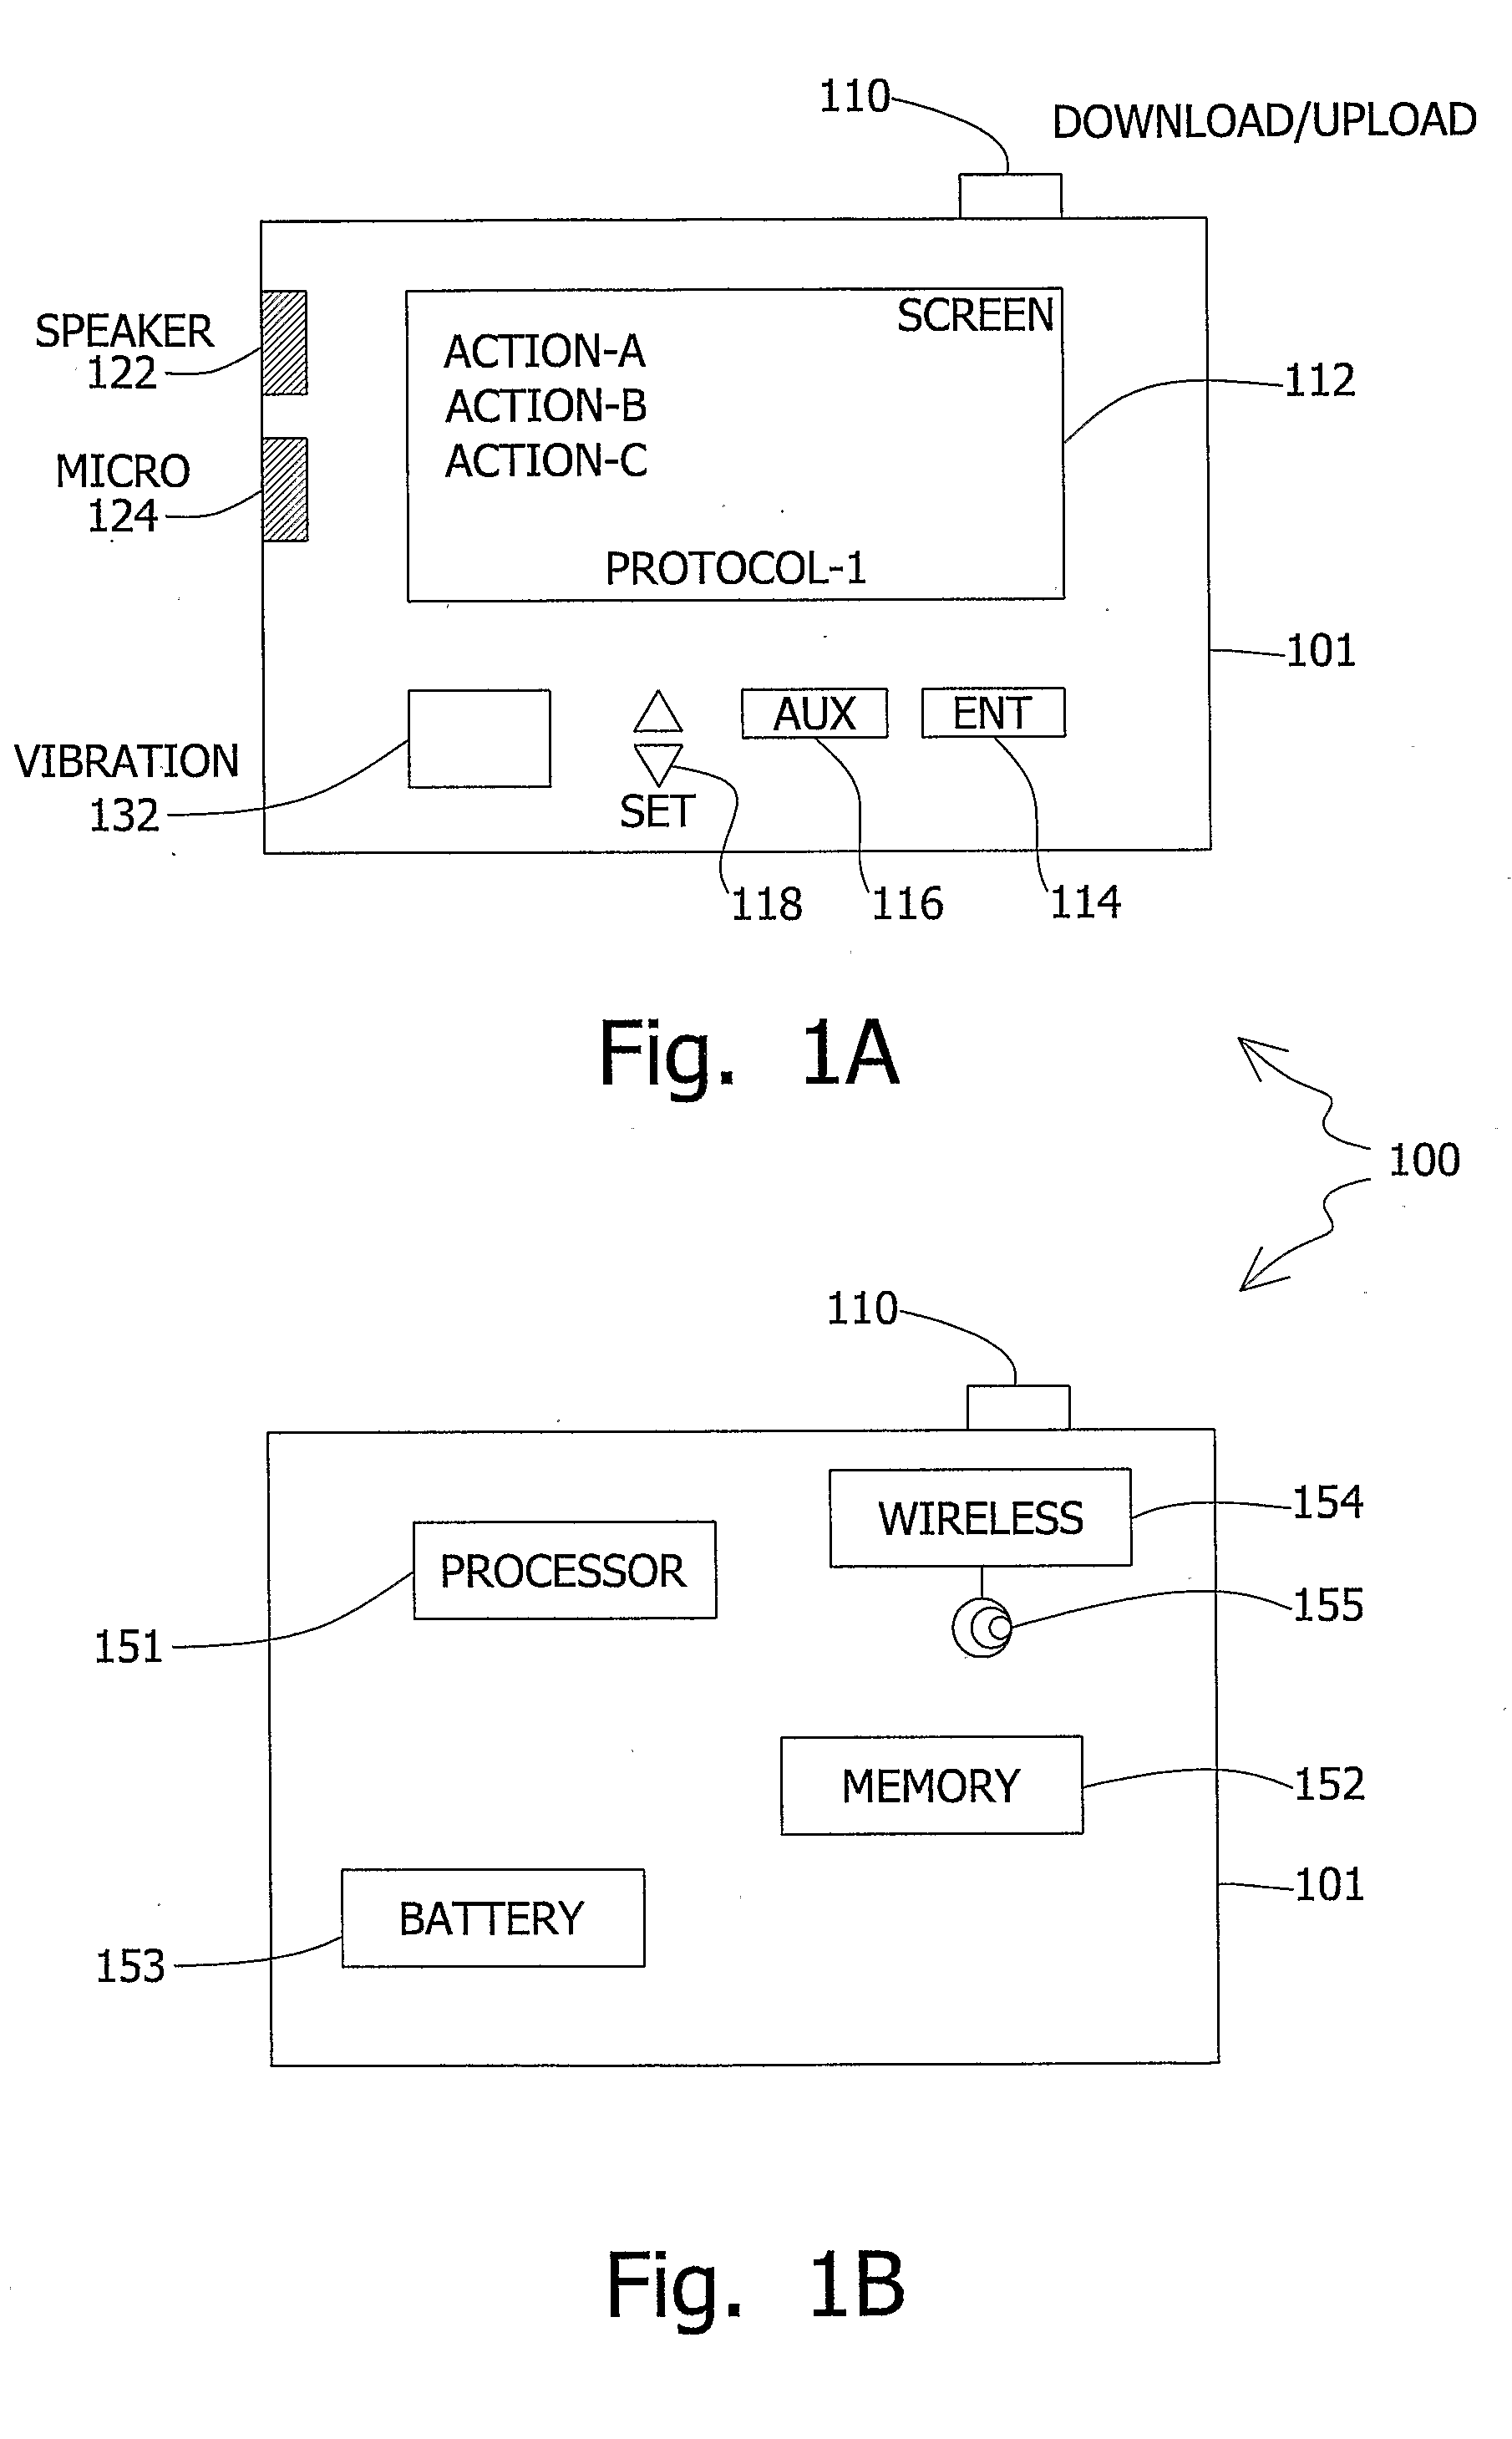 Apparatus and Method for Verifying Procedure Compliance